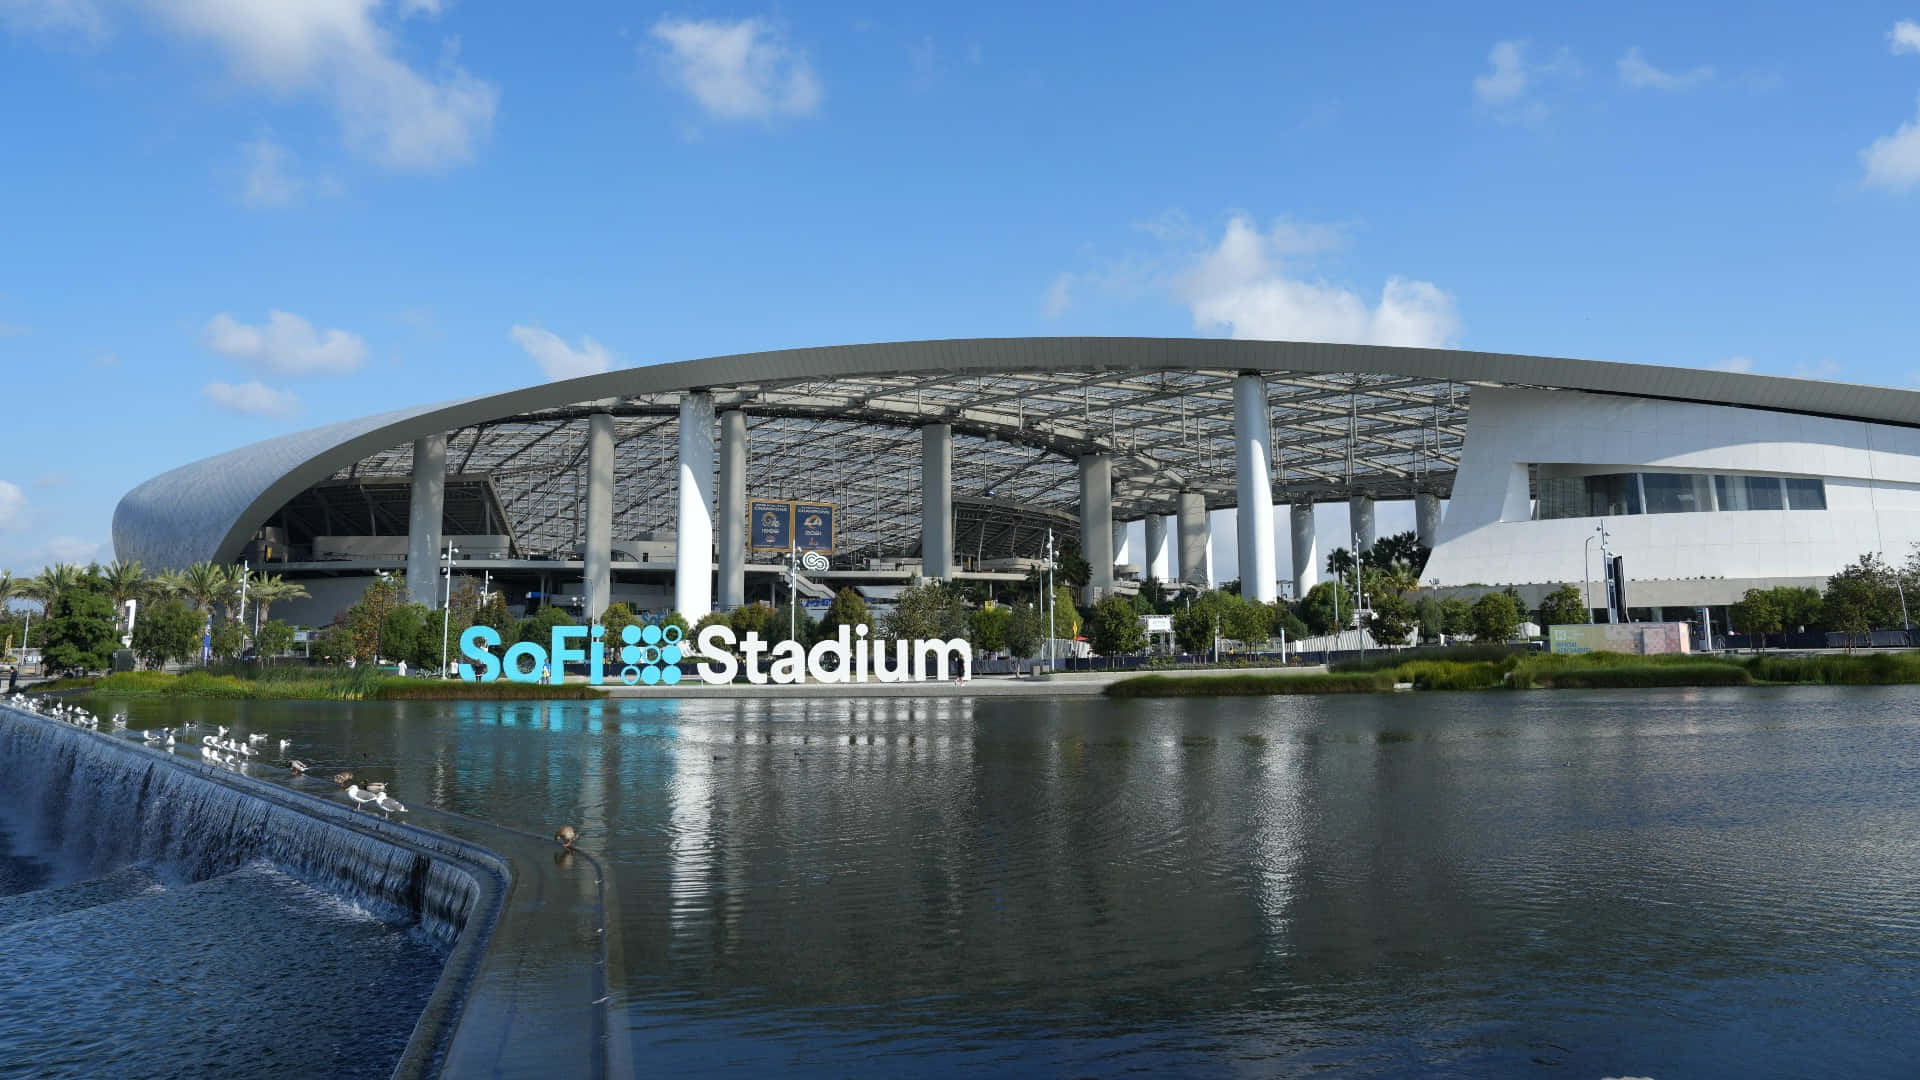 Experience the thrill of the game with Sofi Stadium